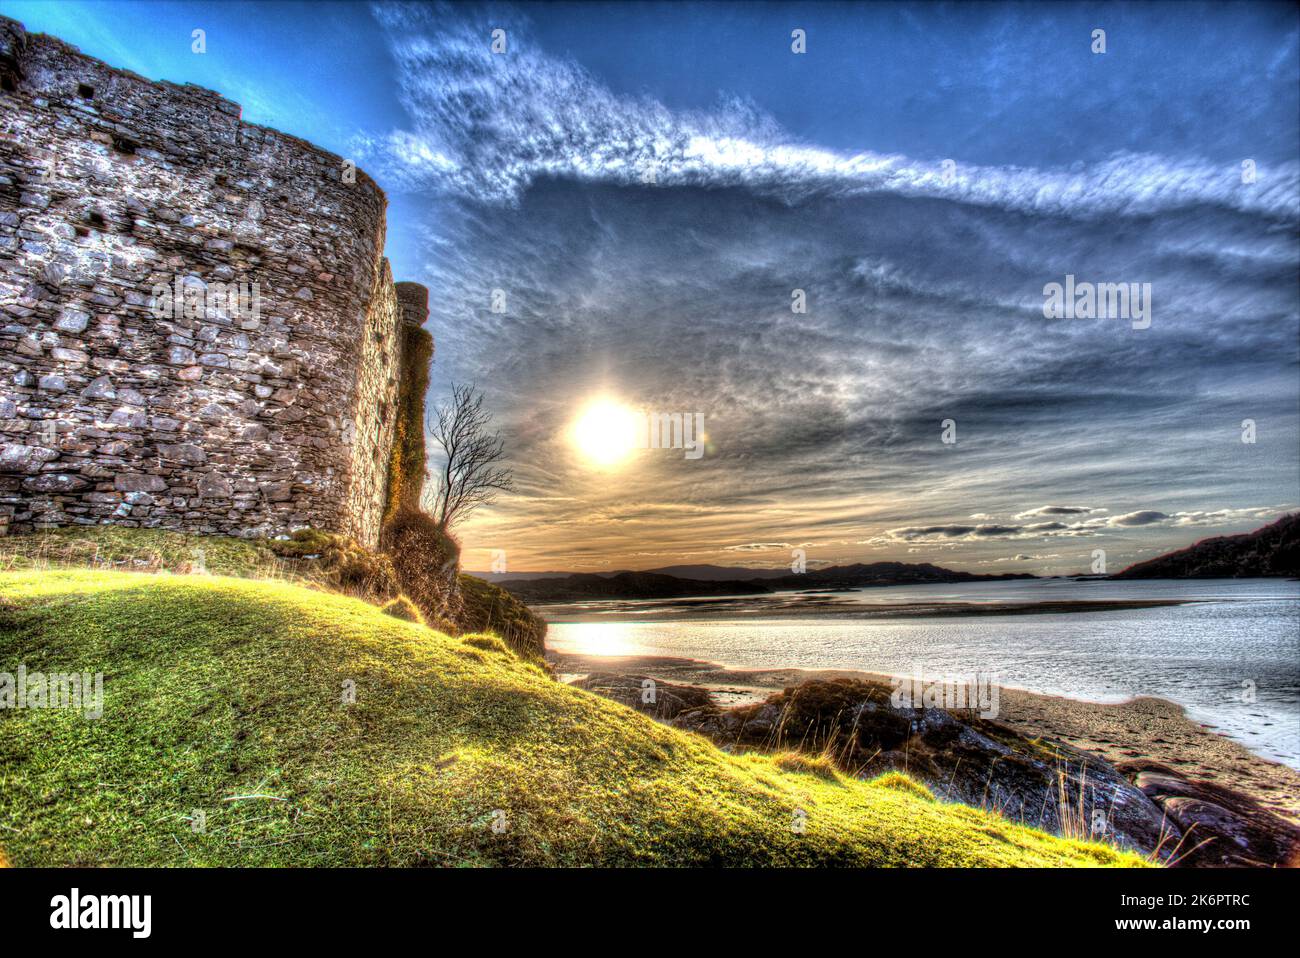 Peninsula of Ardamurchan, Scotland. Artistic view of the historic Castle Tioram walls on the island of Eilean Tioram. Stock Photo